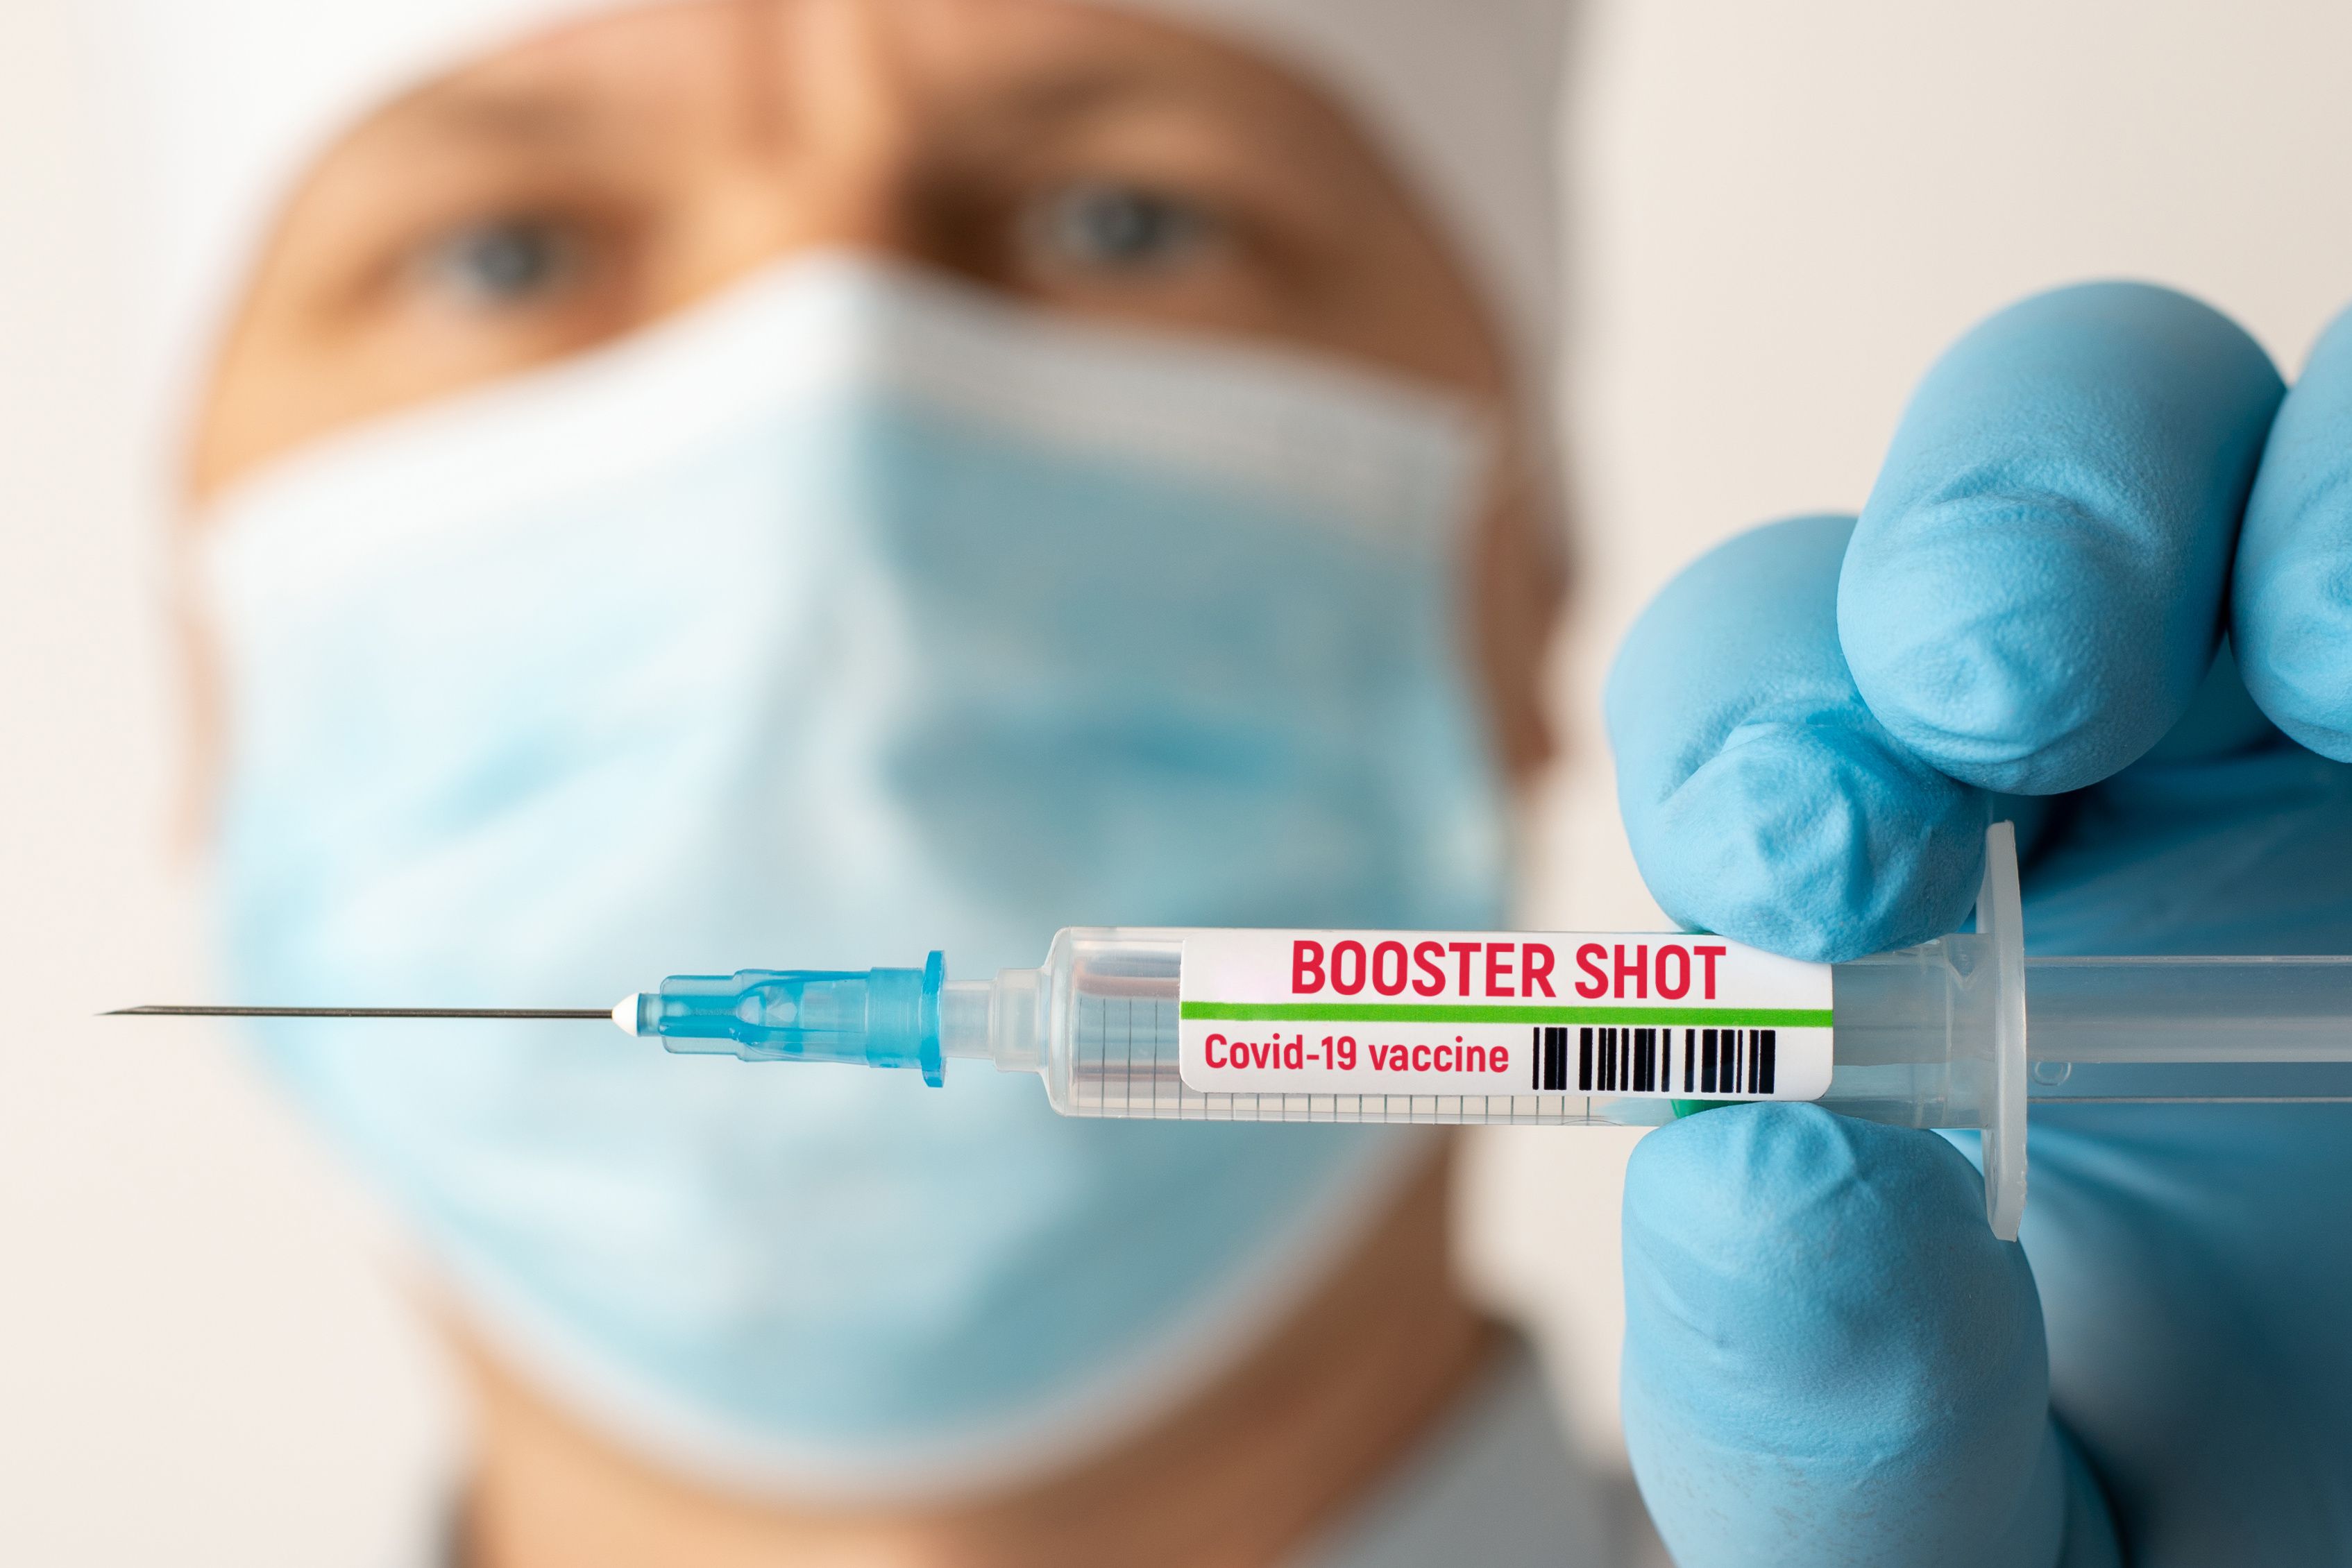 A Booster mRNA Vaccine Required to Protect Against Omicron Variant - Contagionlive.com